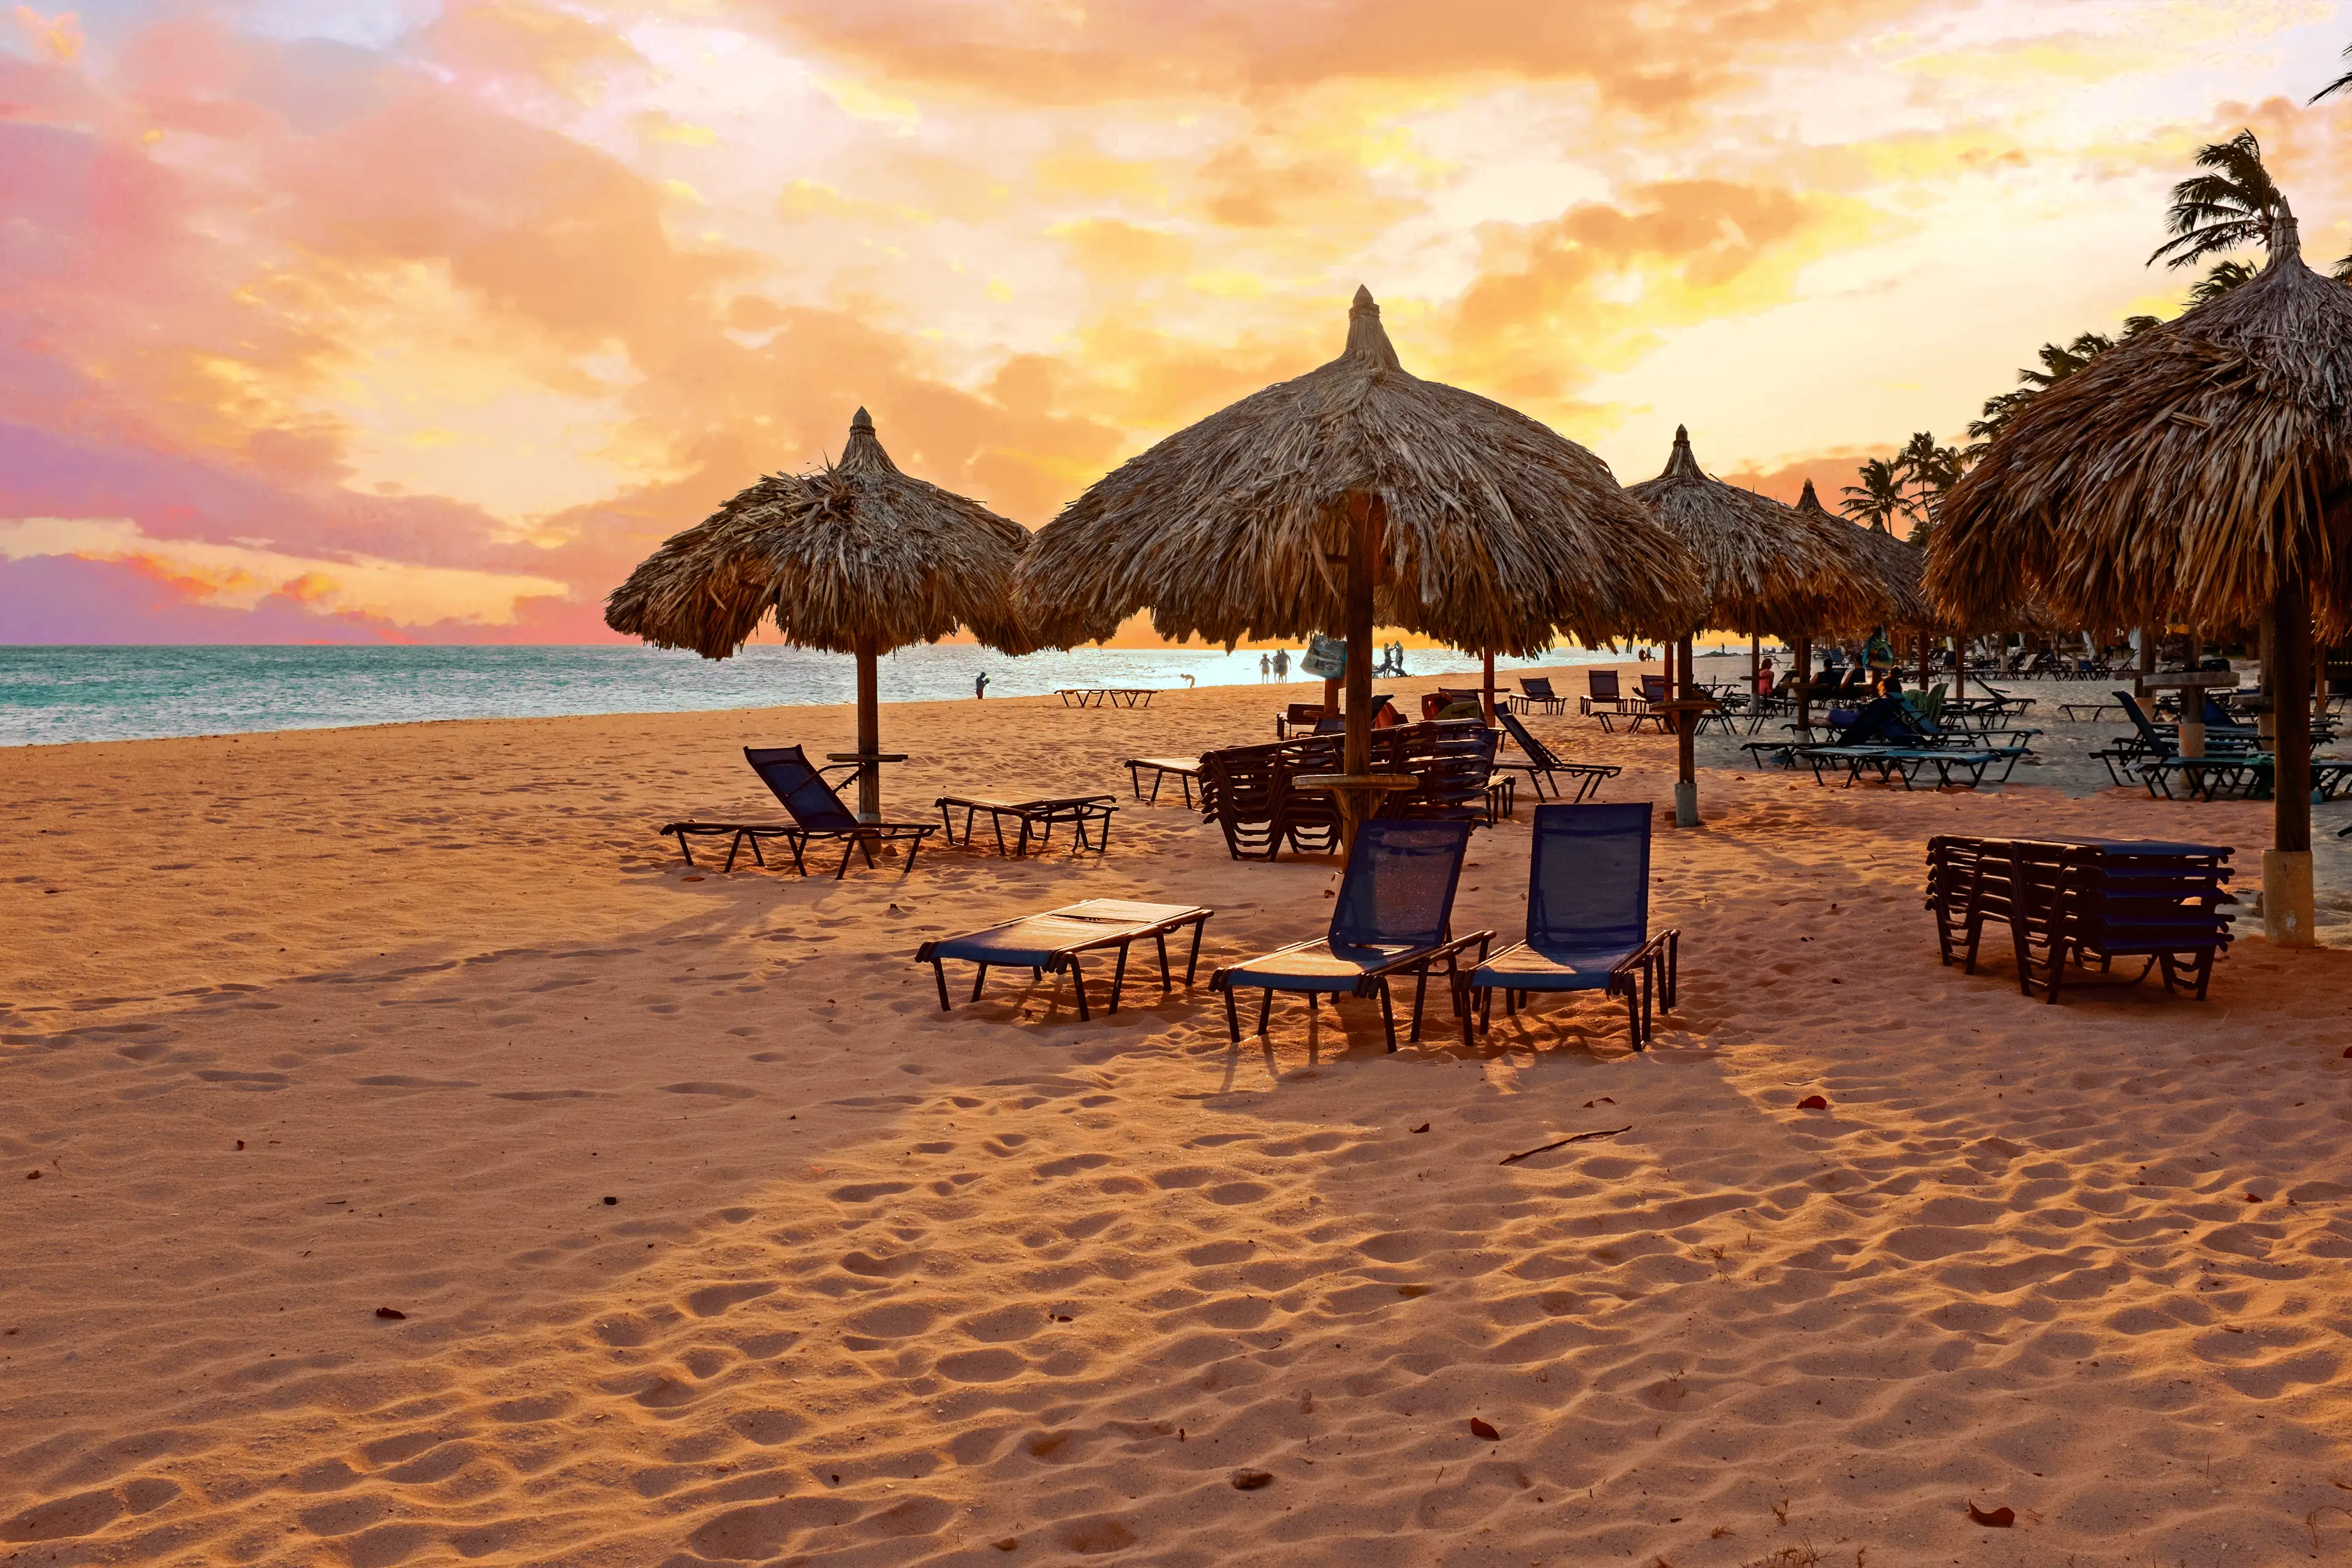 Aruba Sightseeing: A One-day Local Experience Itinerary